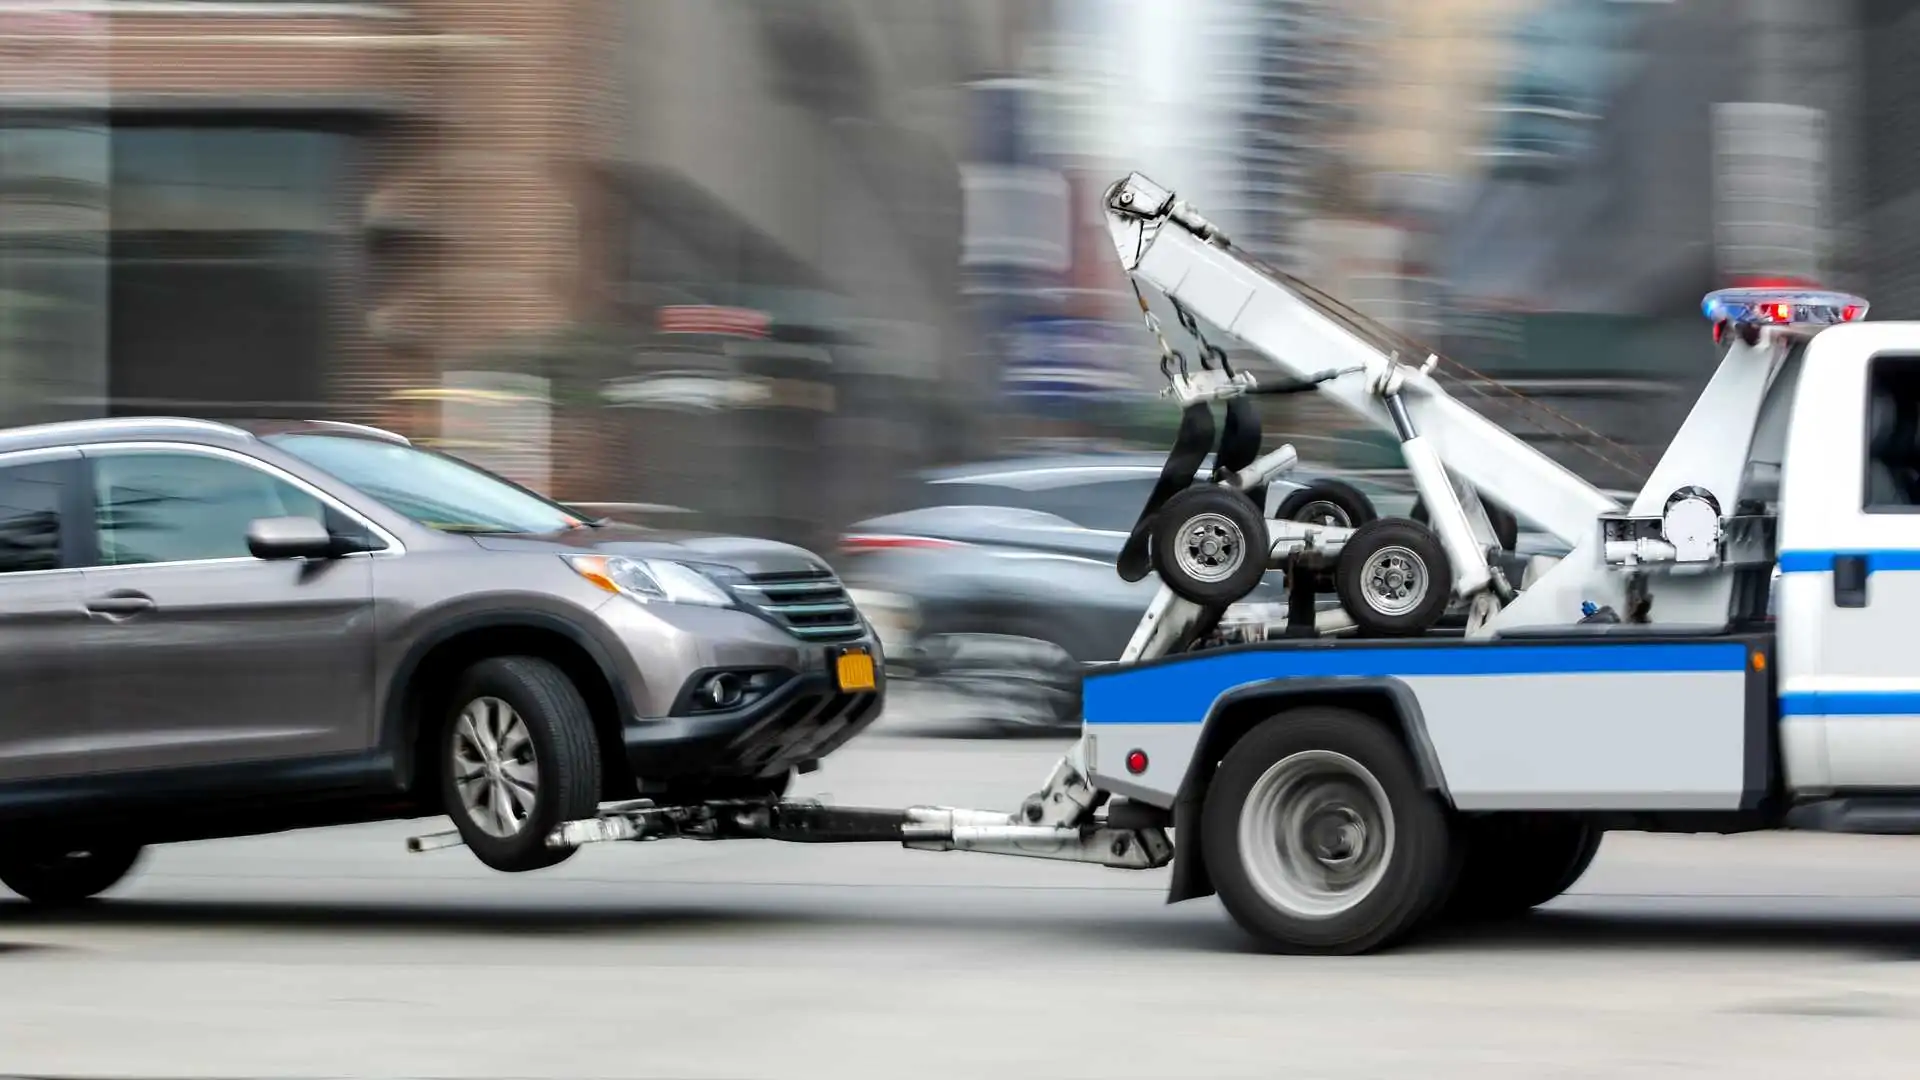 Tow Vehicle Services Tips and Methods for a Risk-Free Tow